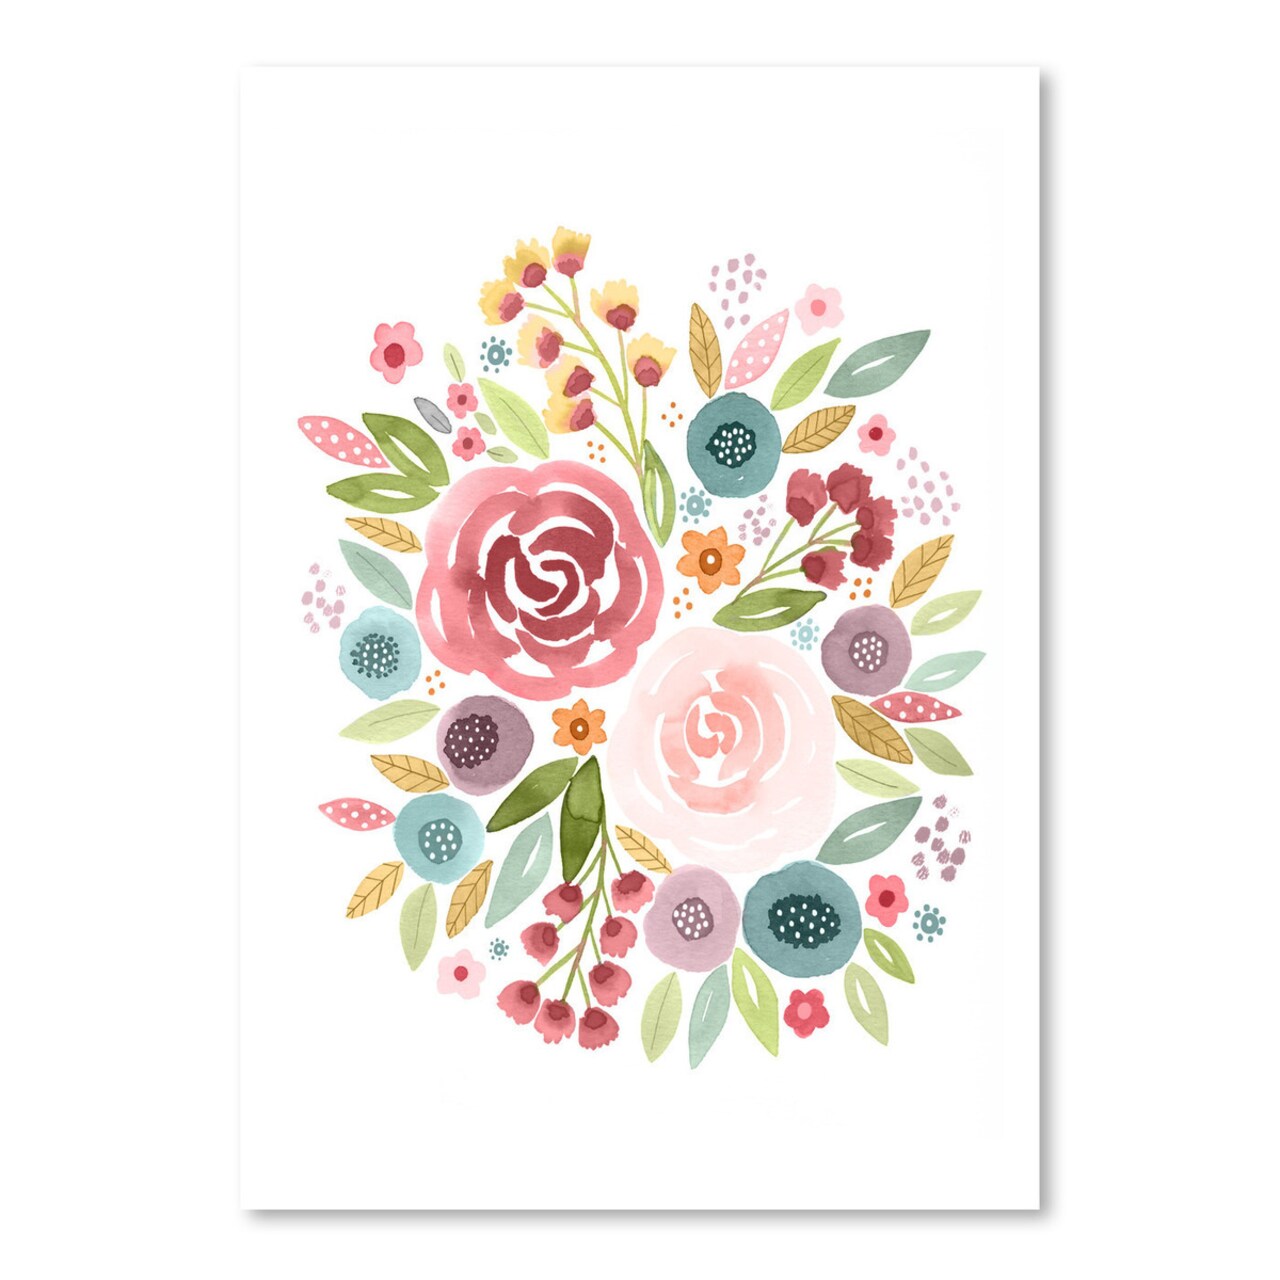 Watercolor Floral 9 by Lisa Nohren  Poster Art Print - Americanflat